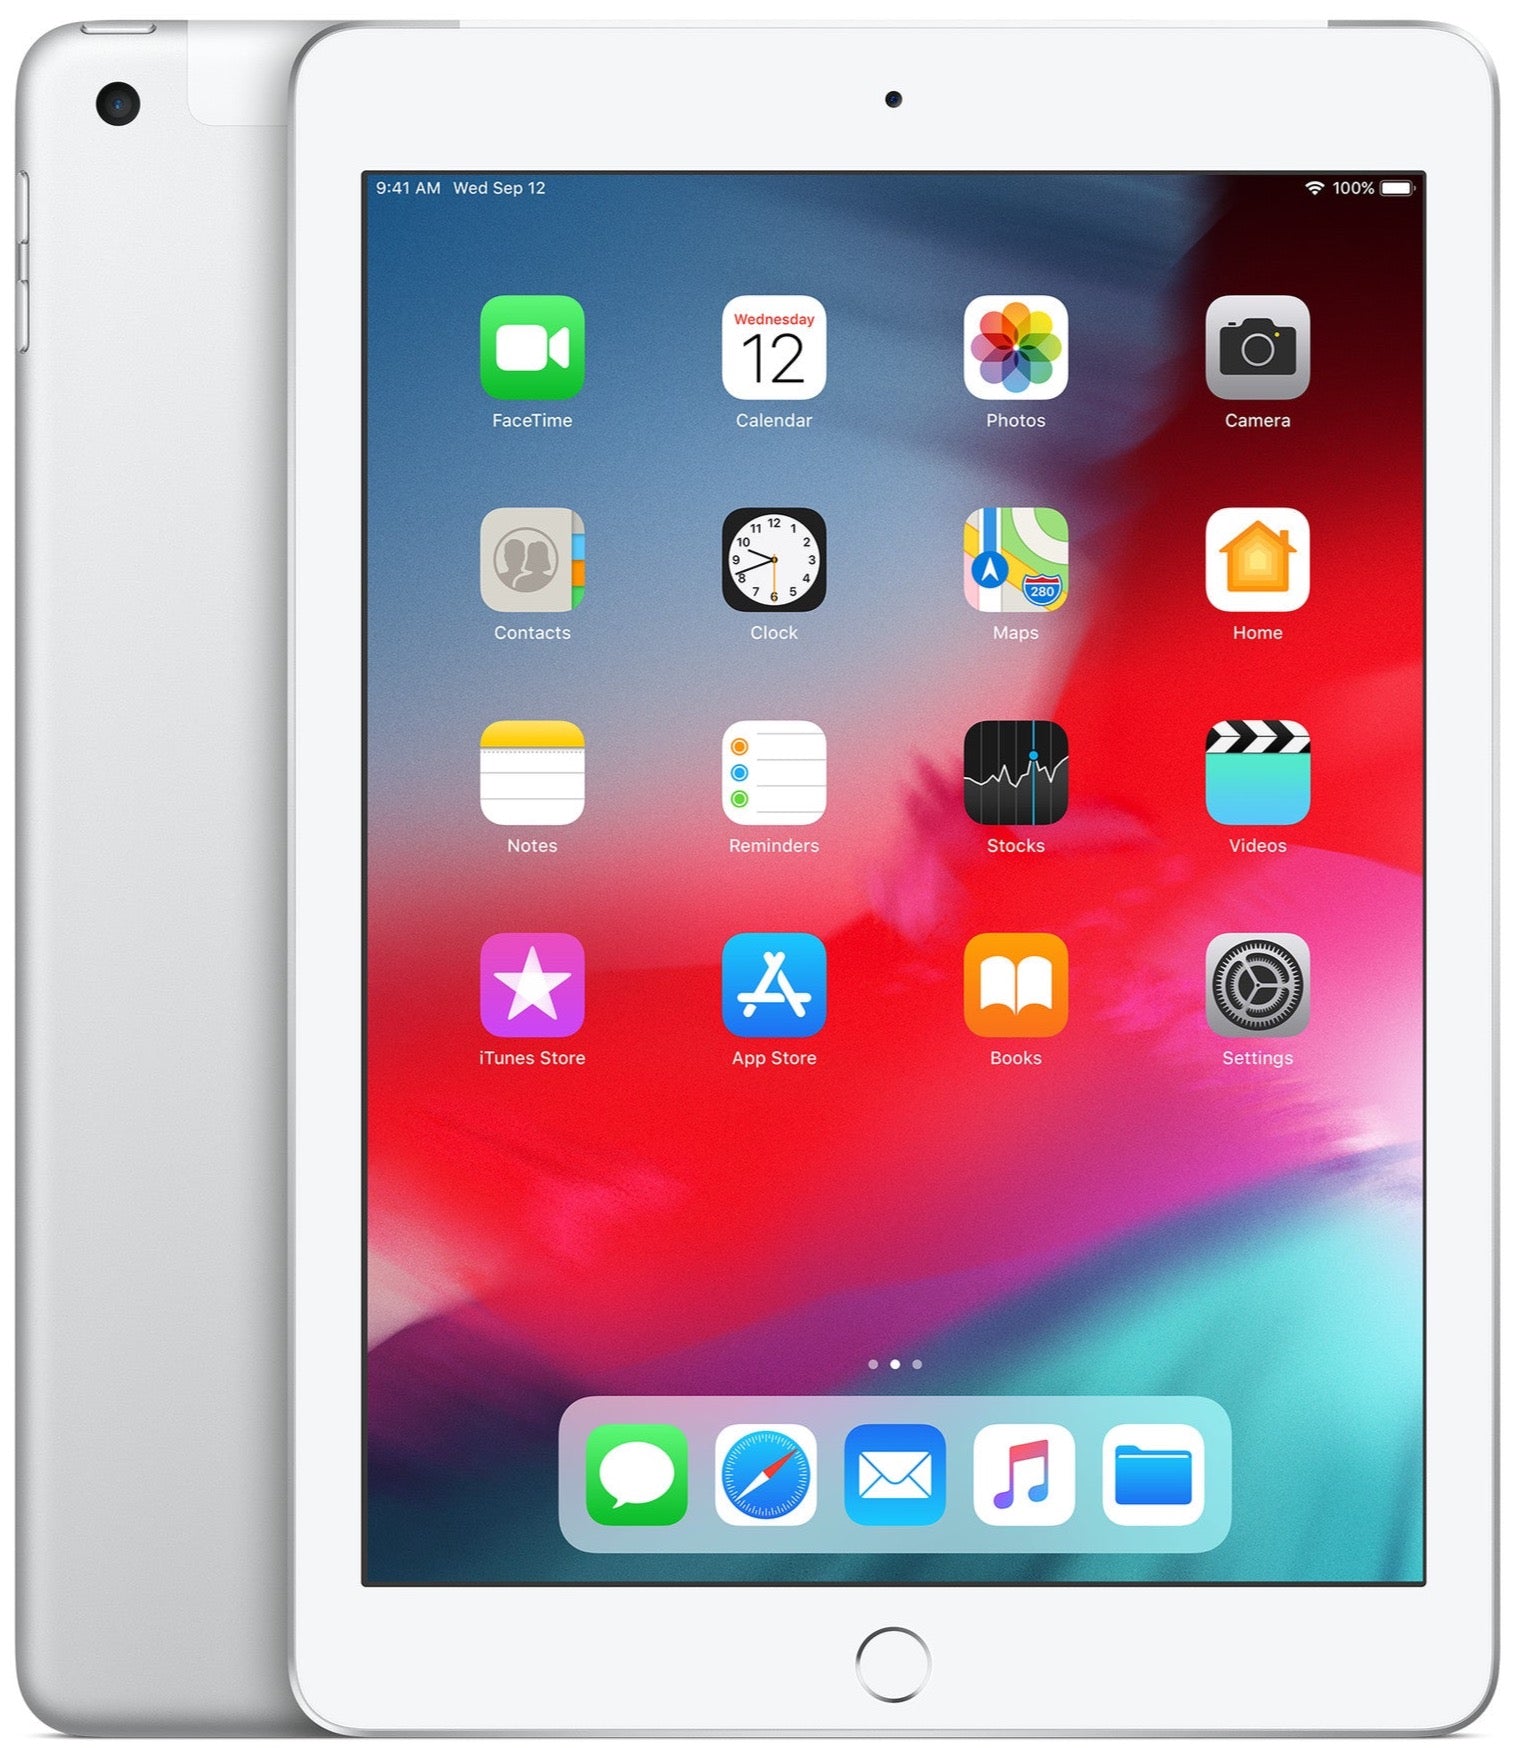 Apple iPad 6 32GB Wi-Fi + Cellular 3G/4G White Silver (Good) Free Shipping & New Glass Screen Protector